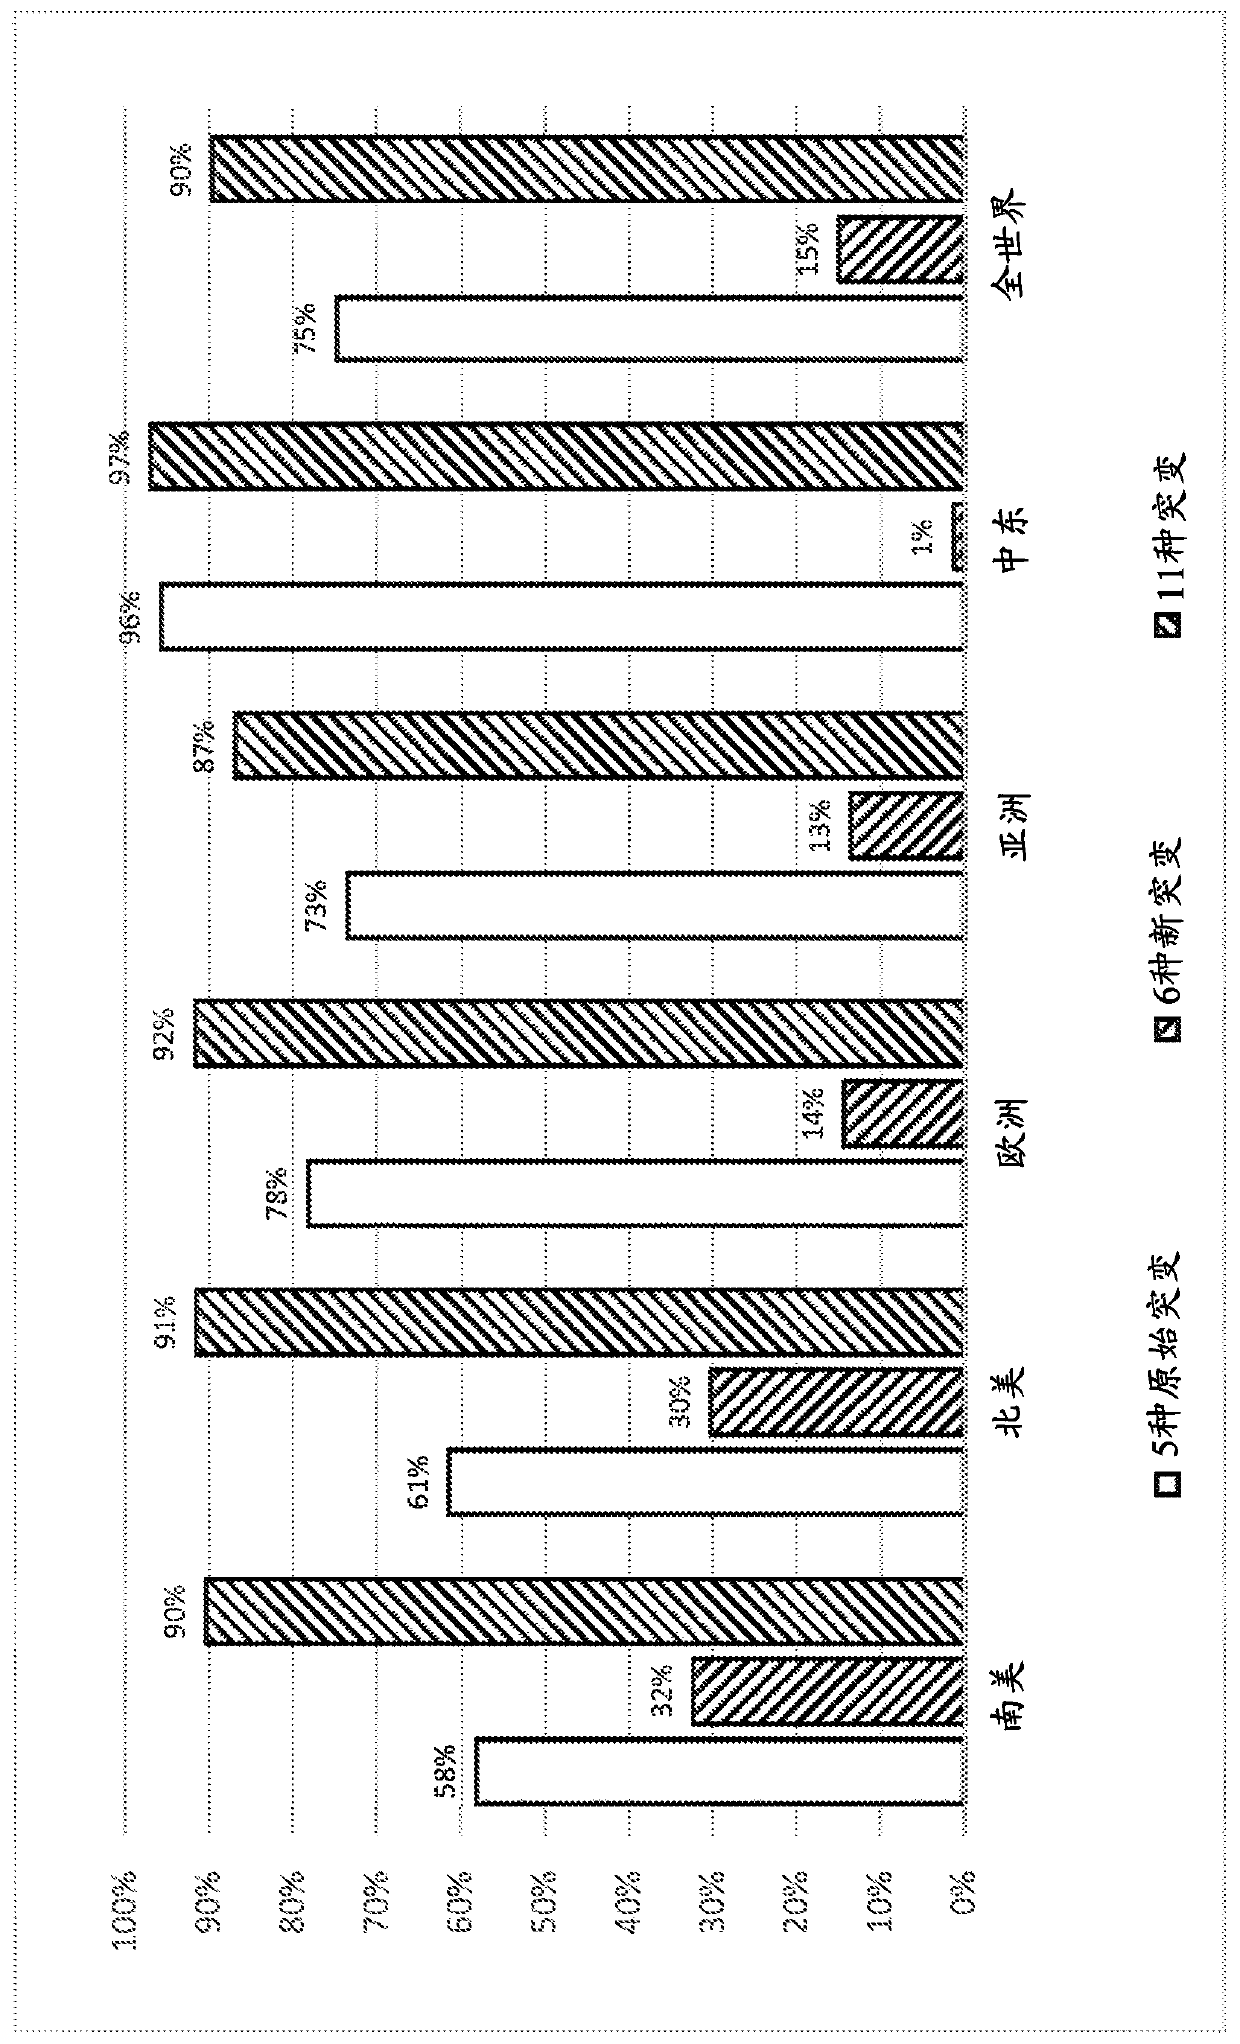 Methods for multiplex detection of alleles associated with corneal dystrophy